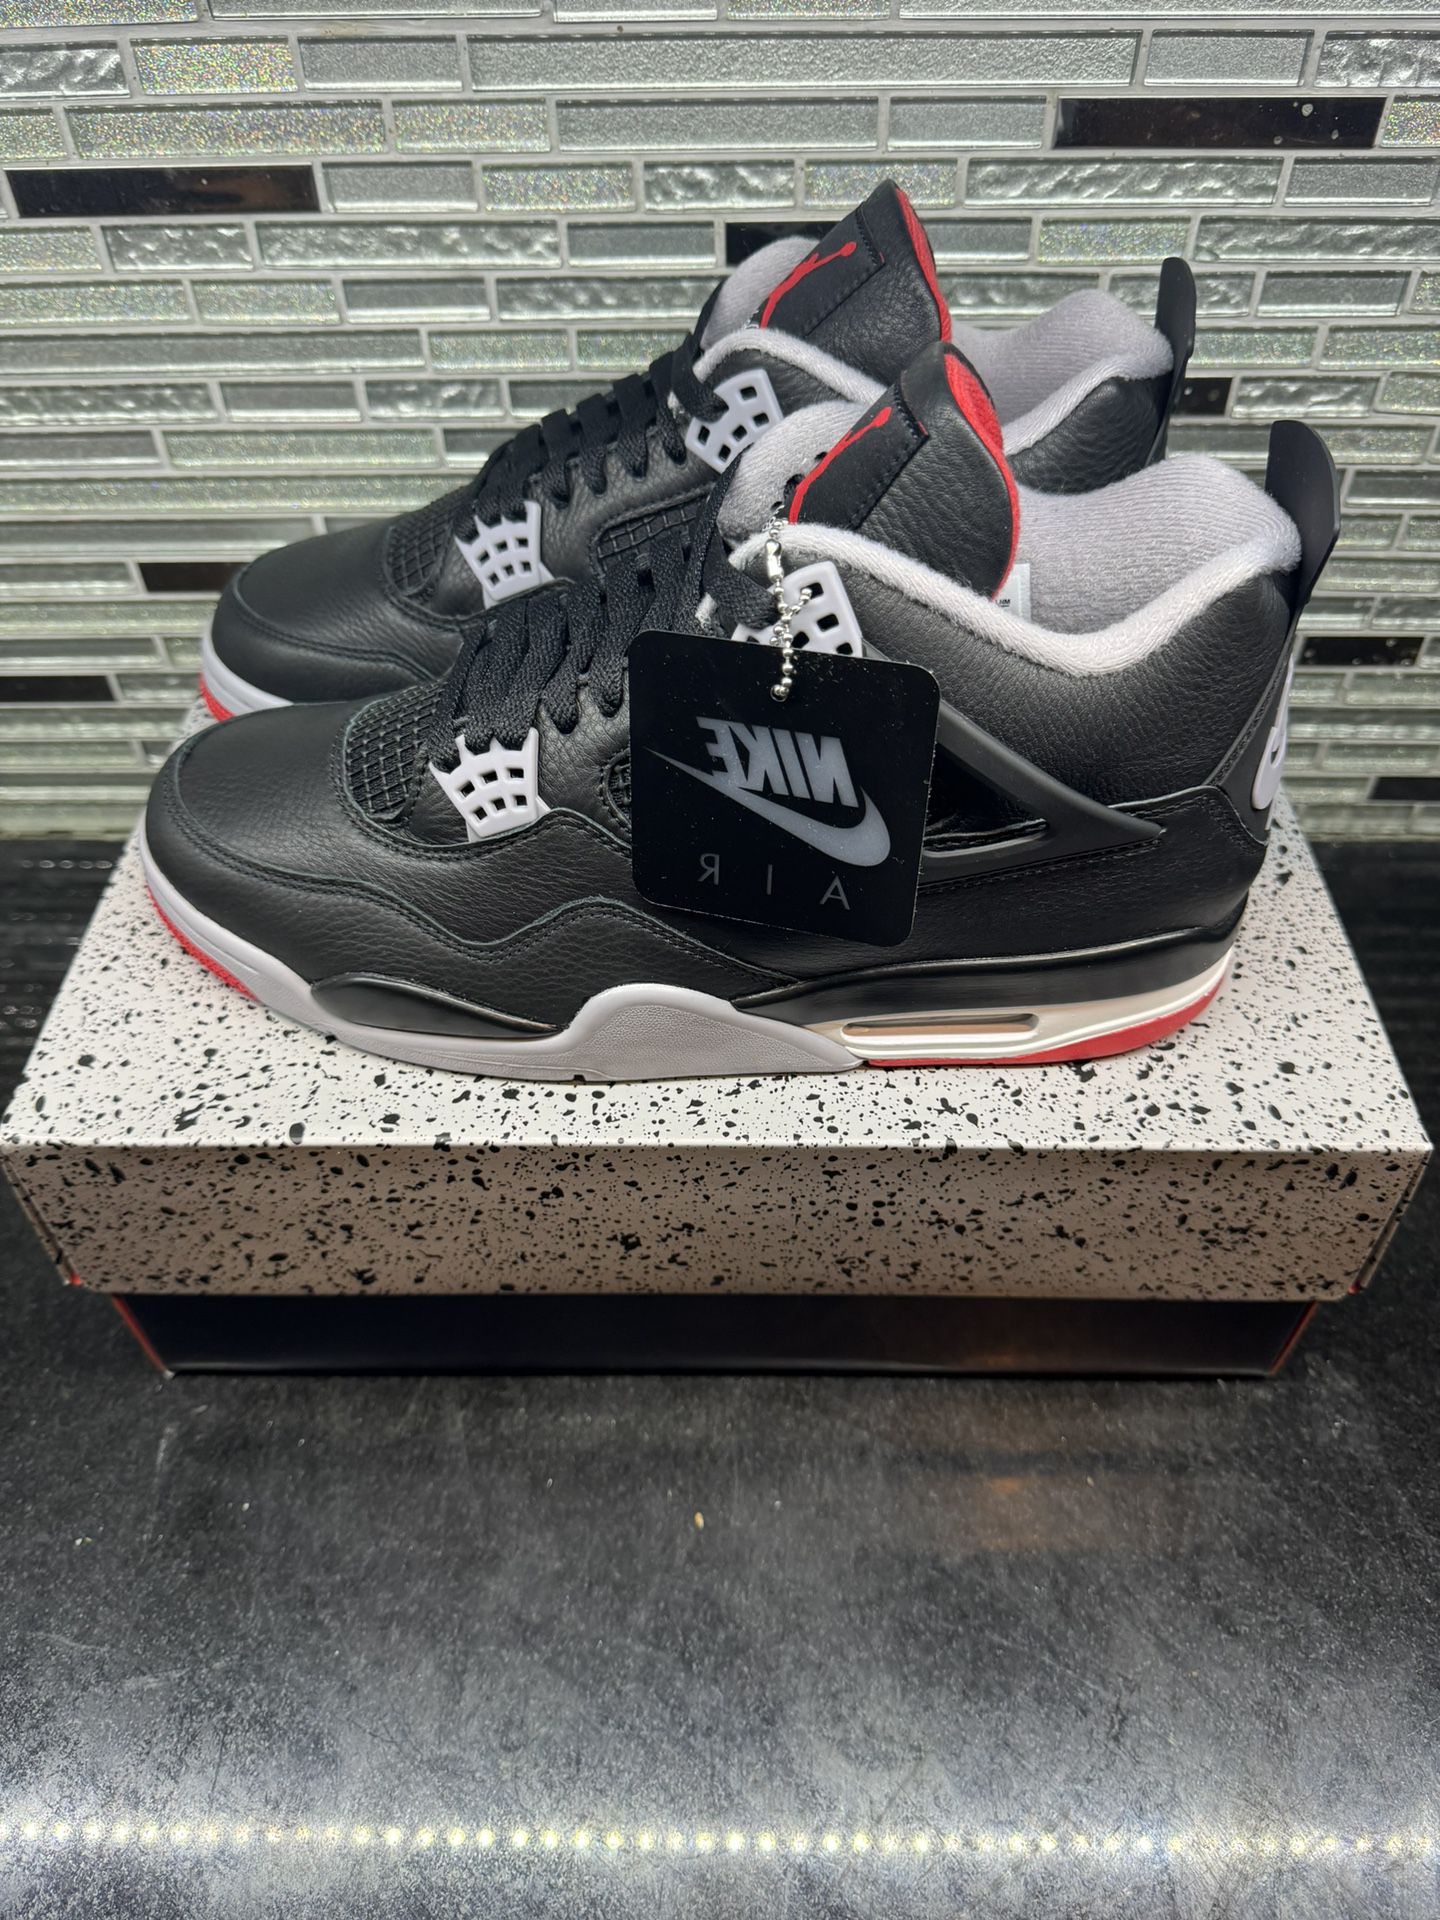 Jordan 4 Bred Reimagined Size 11 And 13